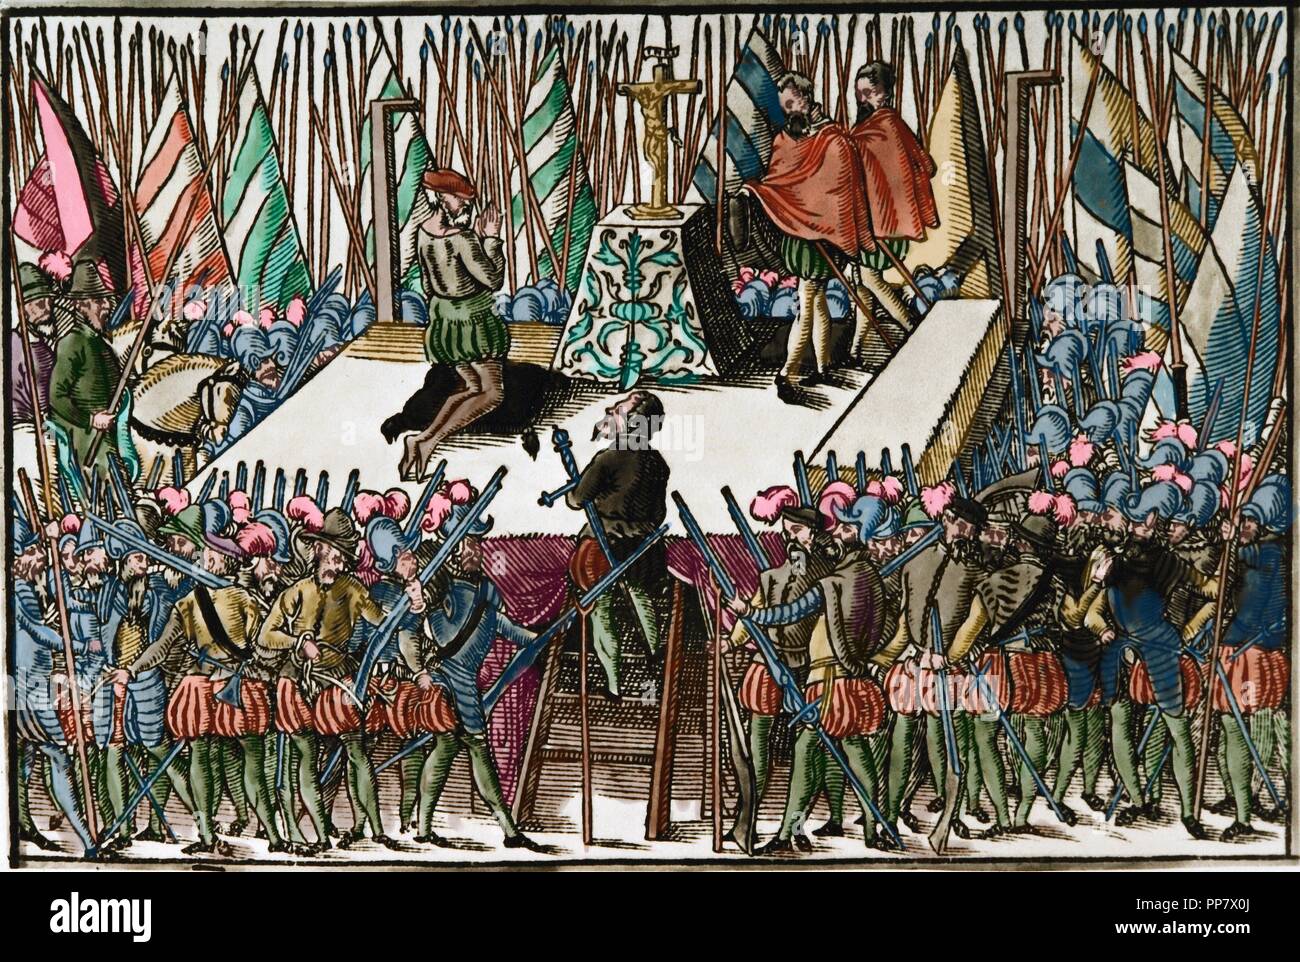 Eighty Year's War or Dutch of Independence 1568-1648. Execution of the Counts of Egmond and Hoorn, Brussels, 1568. Netherlands. Engraving. Colored. Stock Photo